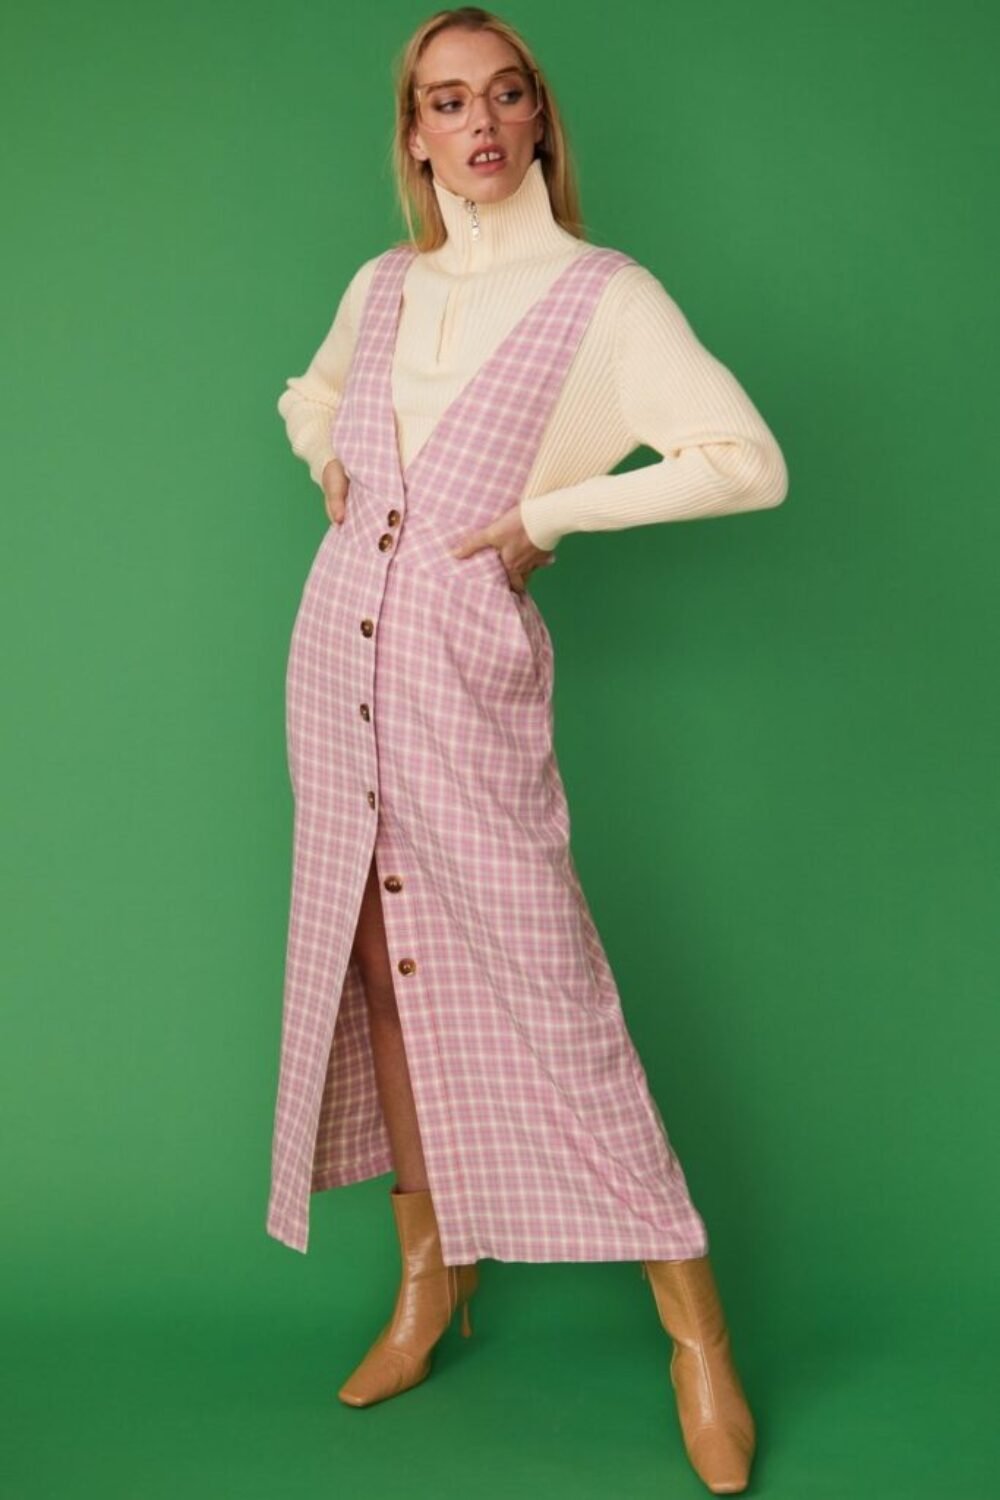 Shop Lux Pink Check Print Maxi Pinafore Dress and women's luxury and designer clothes at www.lux-apparel.co.uk